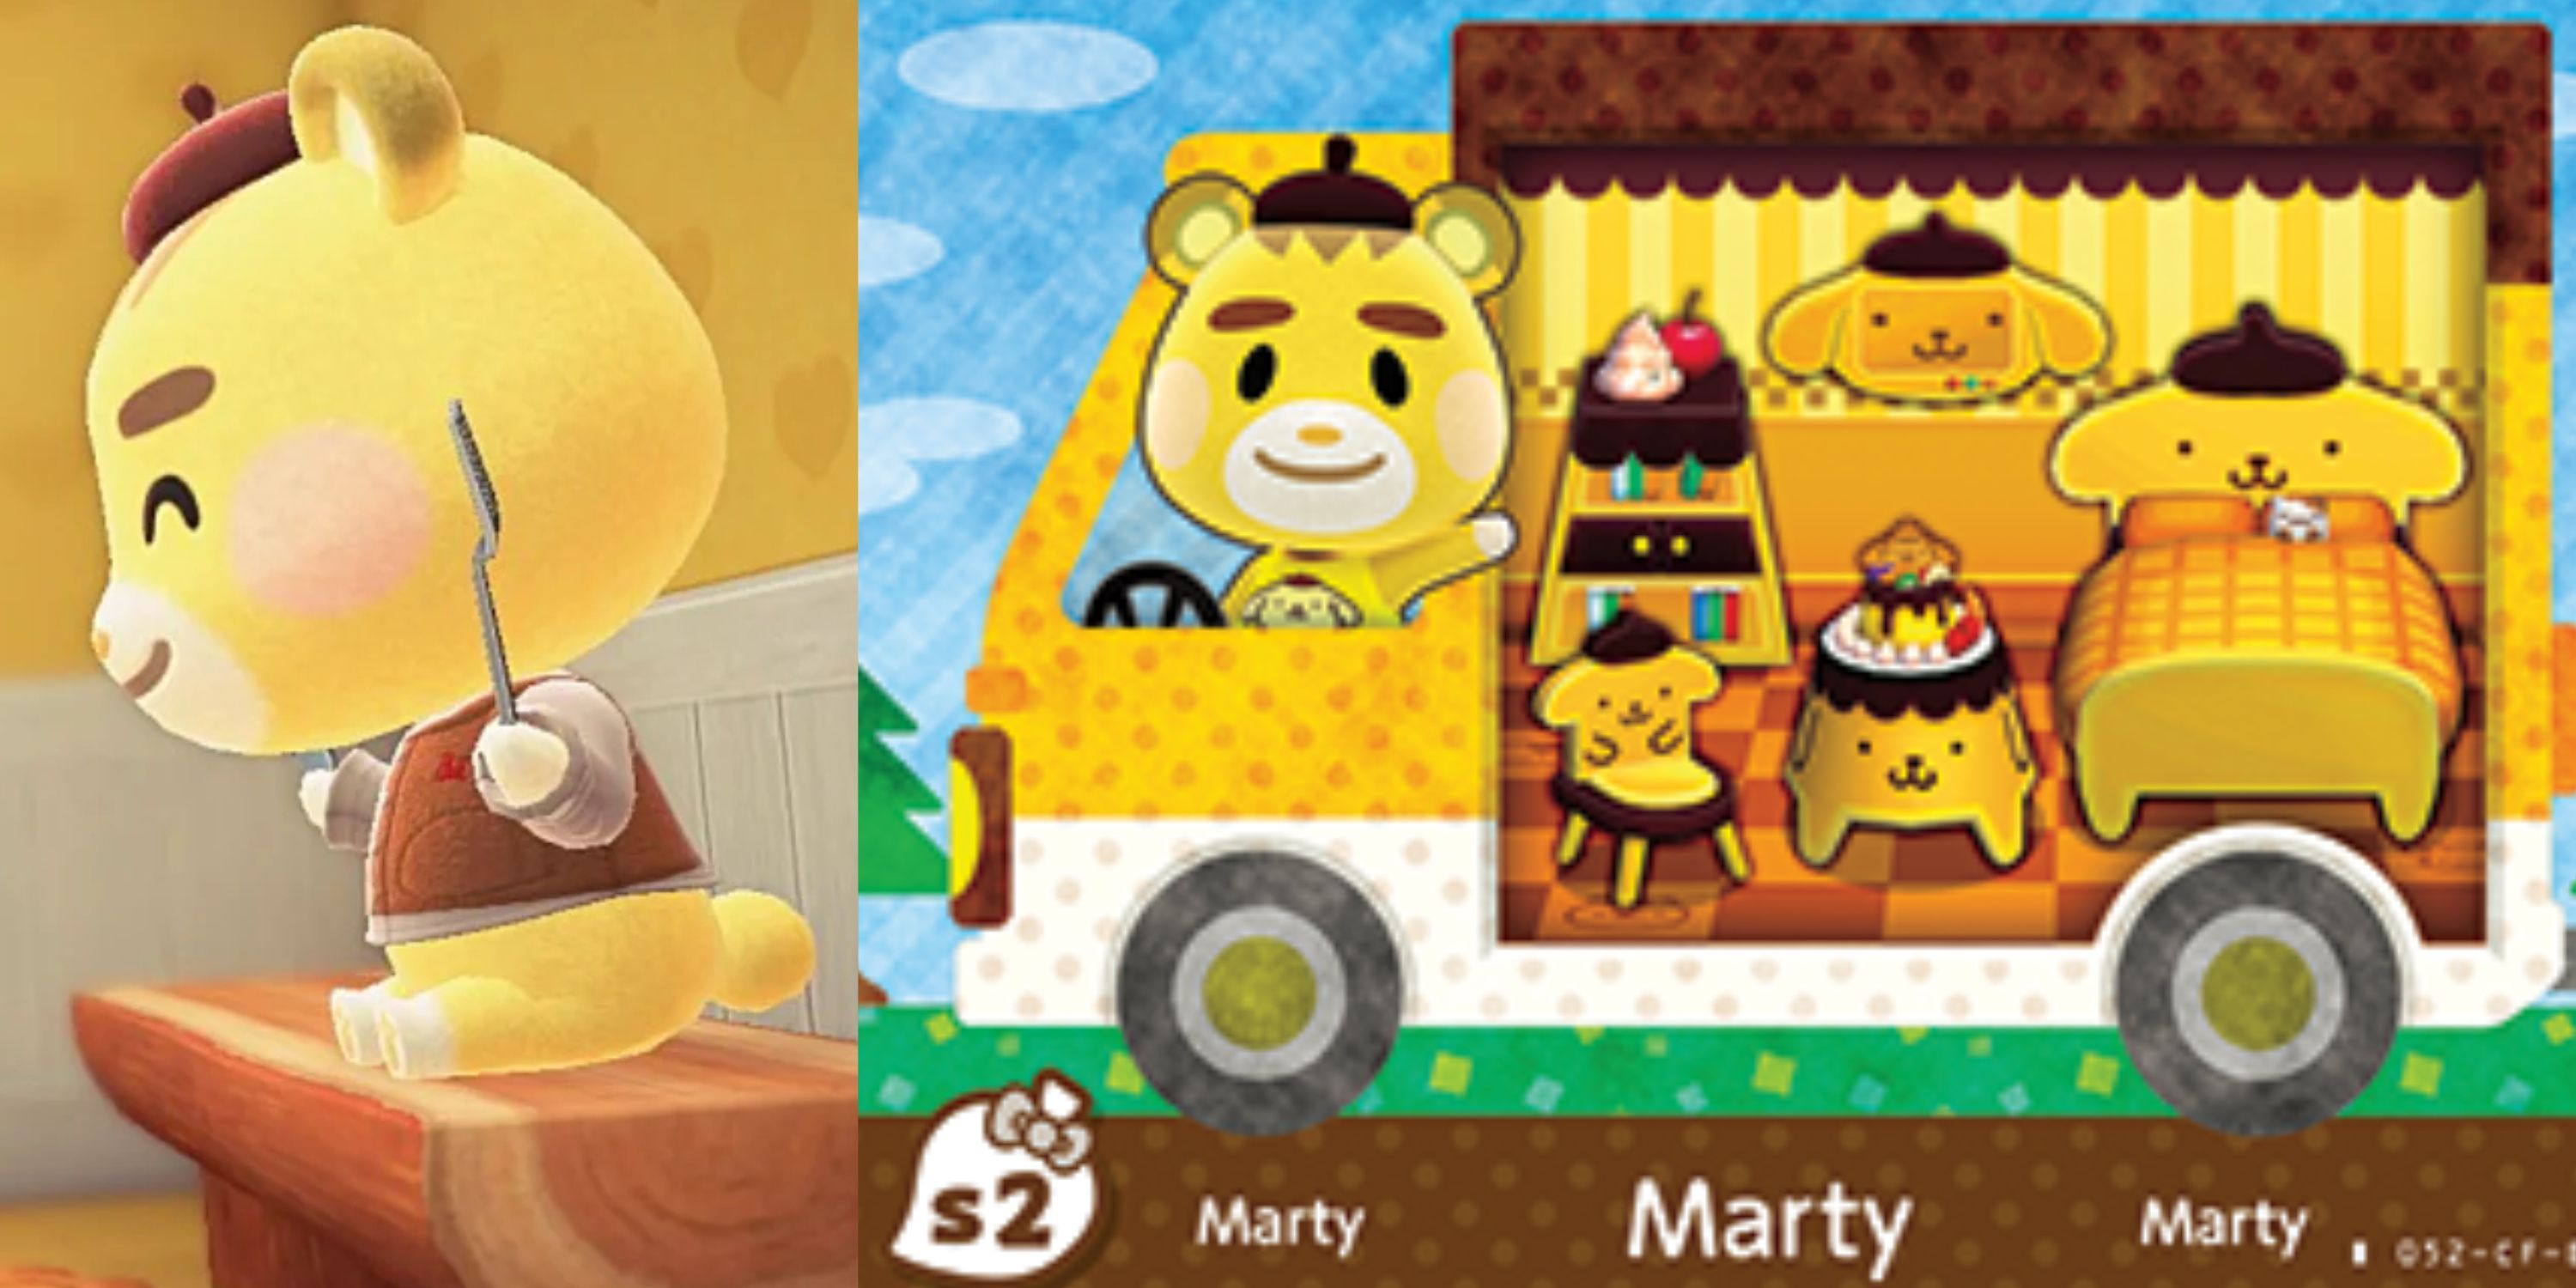 Marty is a Pompoppurin inspired Bear Cub villager